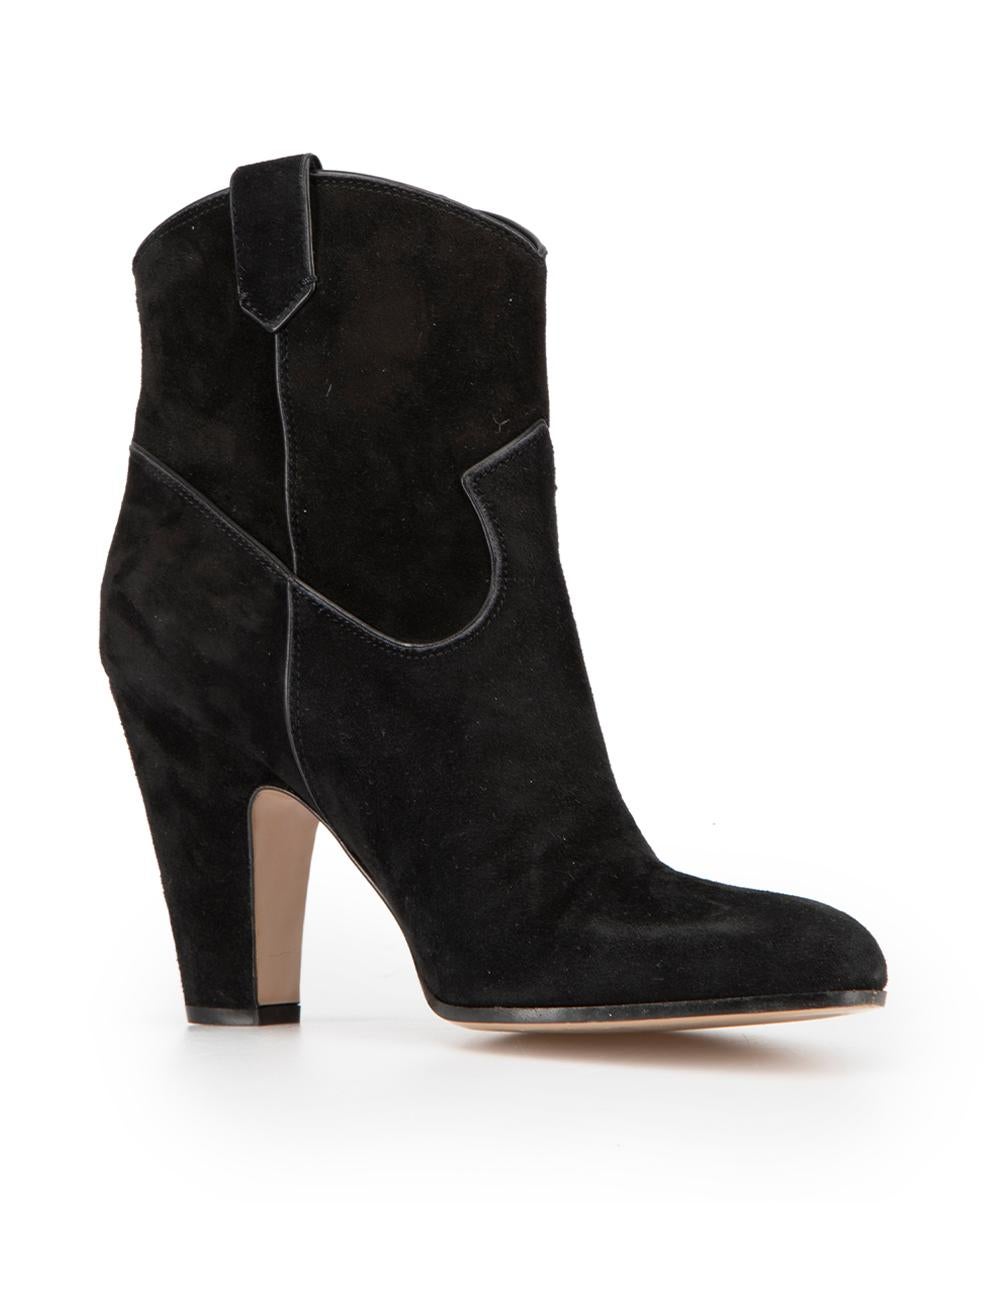 CONDITION is Very good. Minimal wear to boots is evident. Minimal wear to both heels with scuff marks on this used Gianvito Rossi designer resale item.



Details


Black

Suede

High heeled cowboy boots

Round-toe

Slip-on



 

Made in